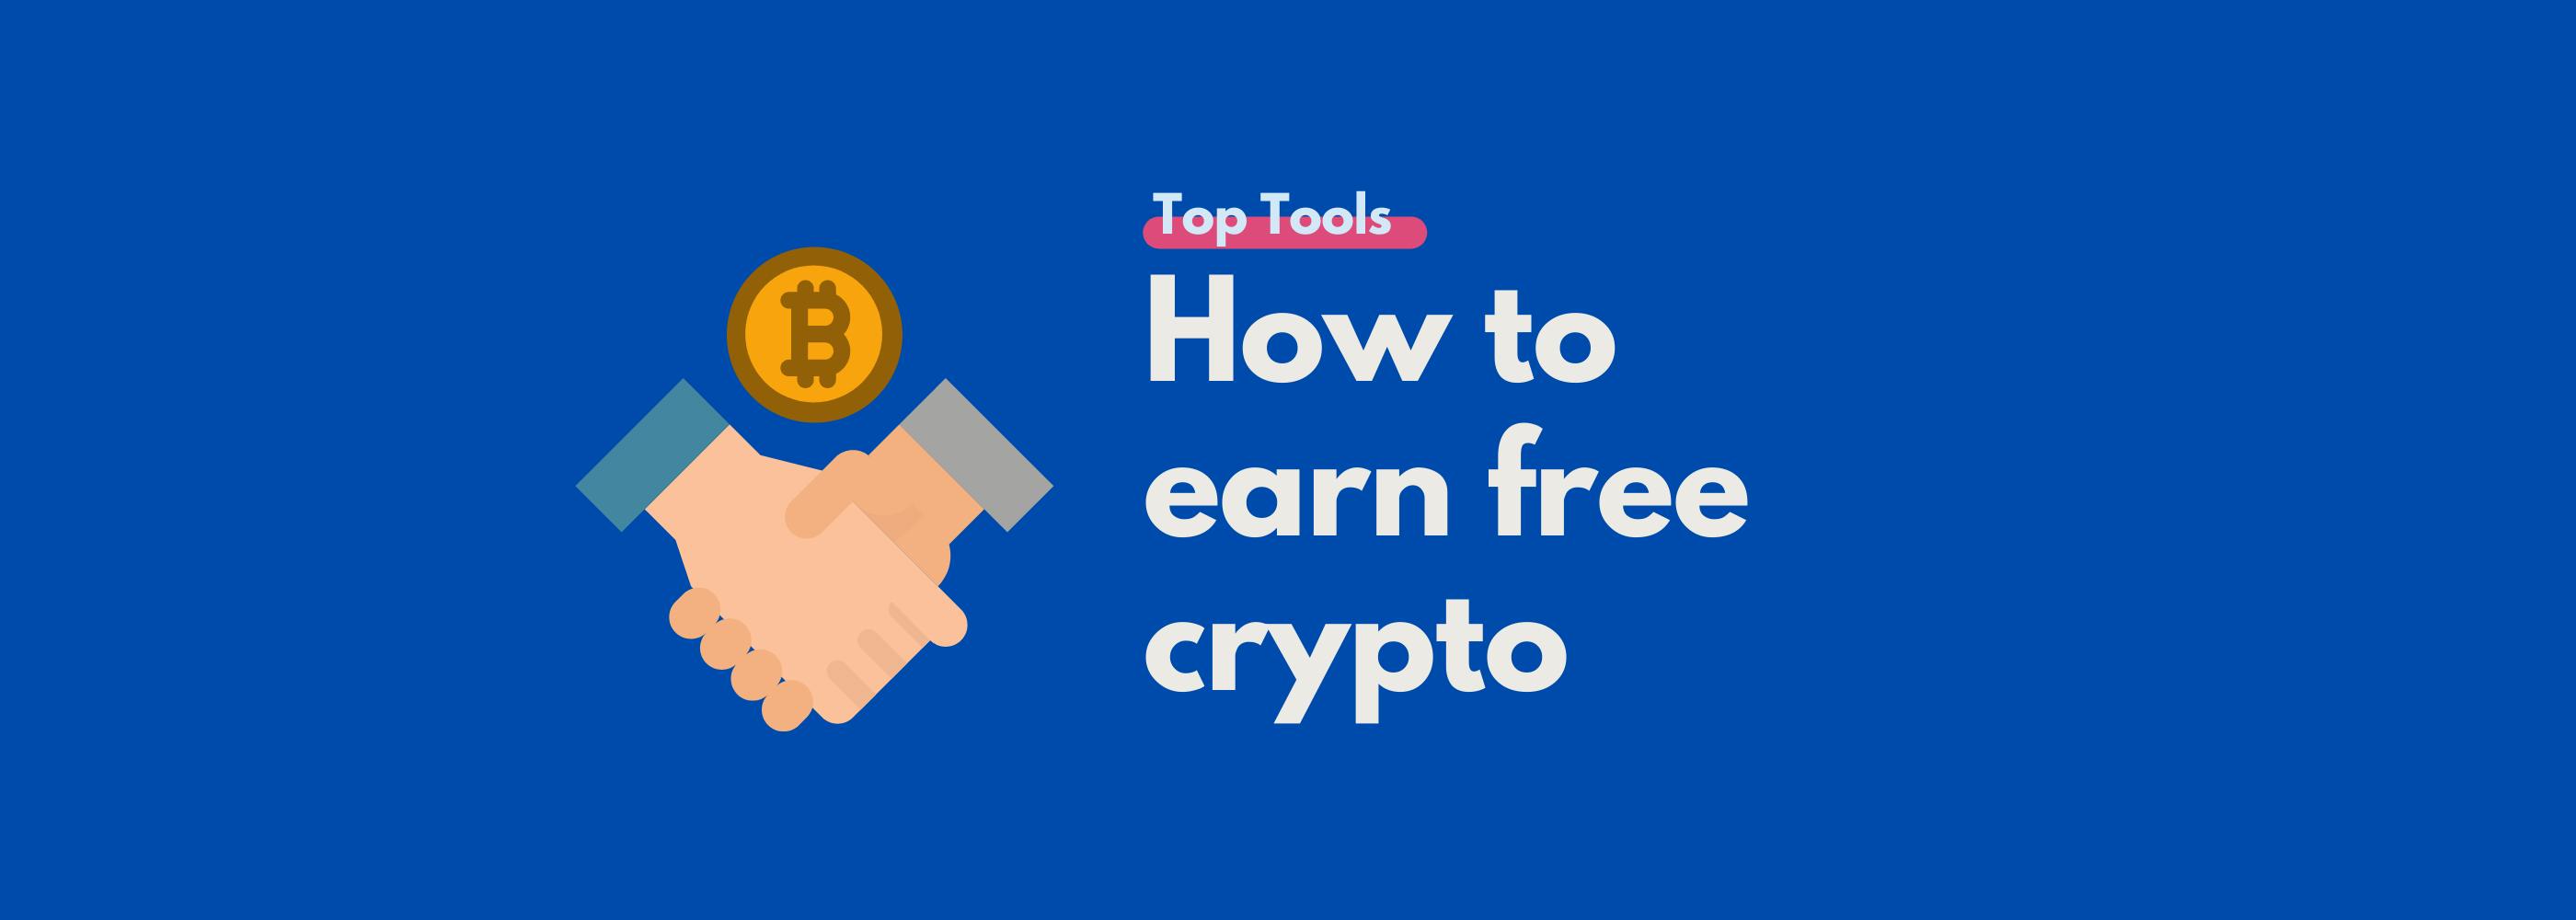 How To Earn Free Cryptocurrency 10 Easy Ways Koinly